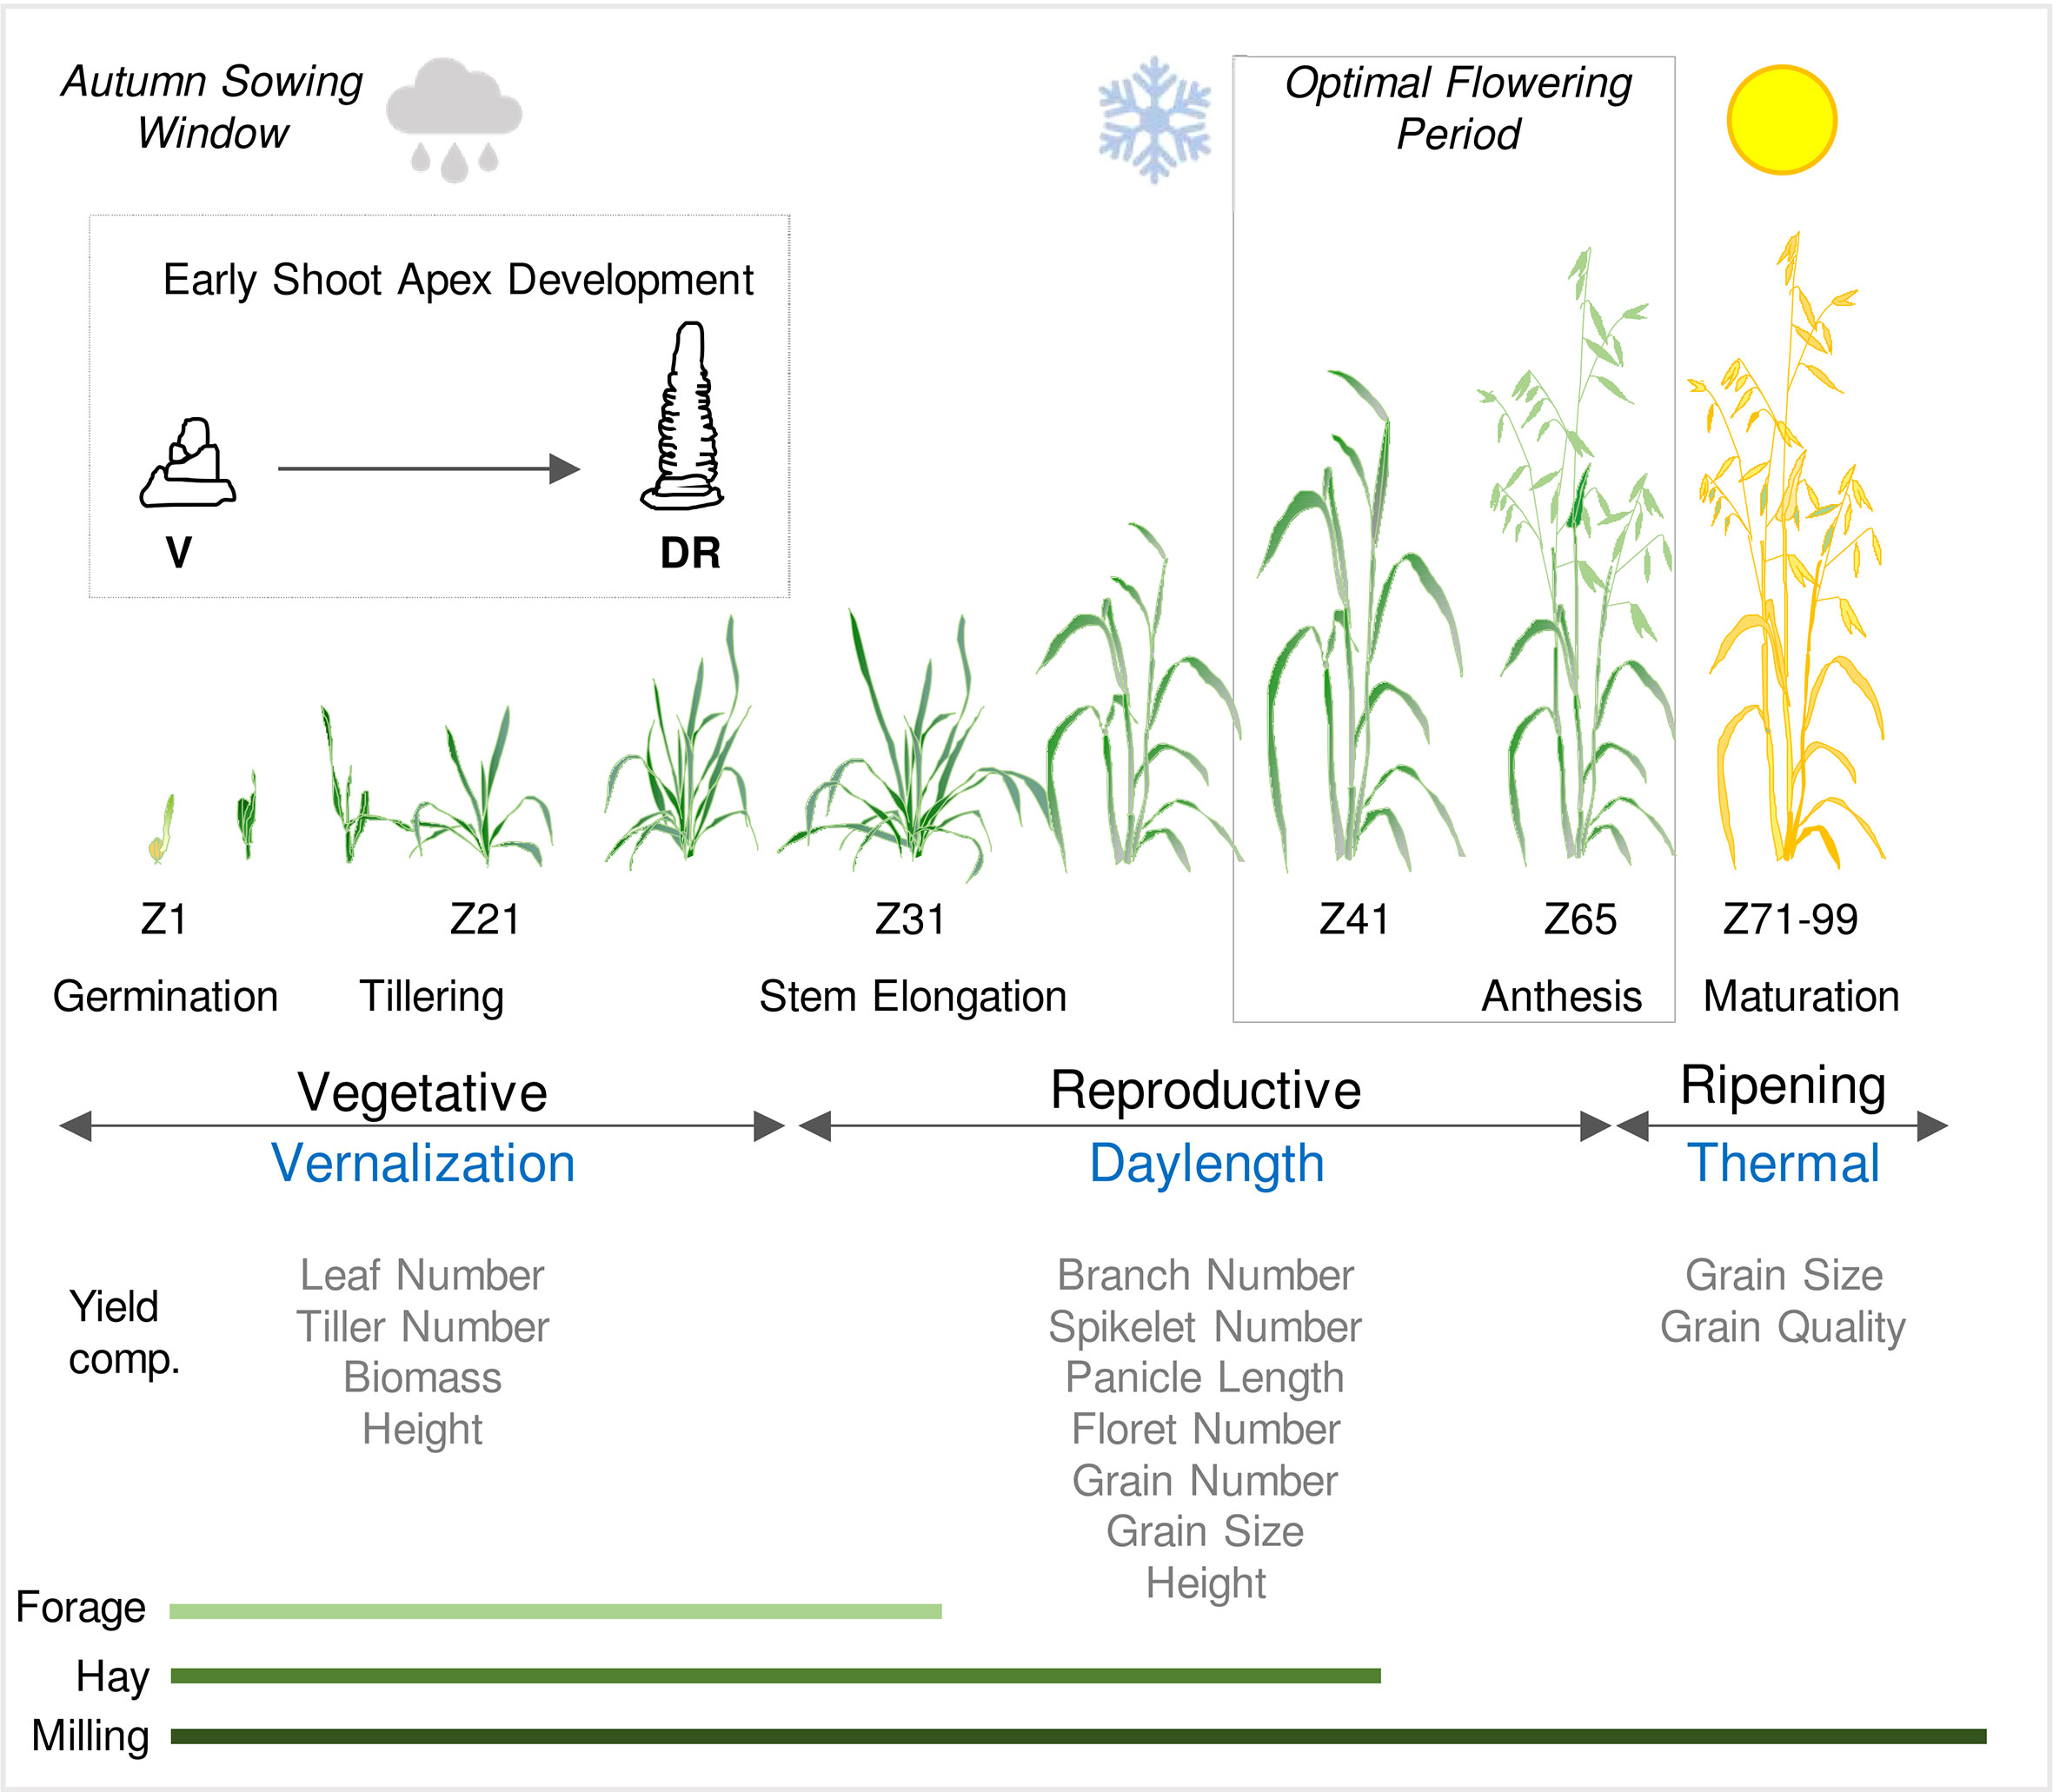 Frontiers | Advancing understanding of oat phenology for crop adaptation